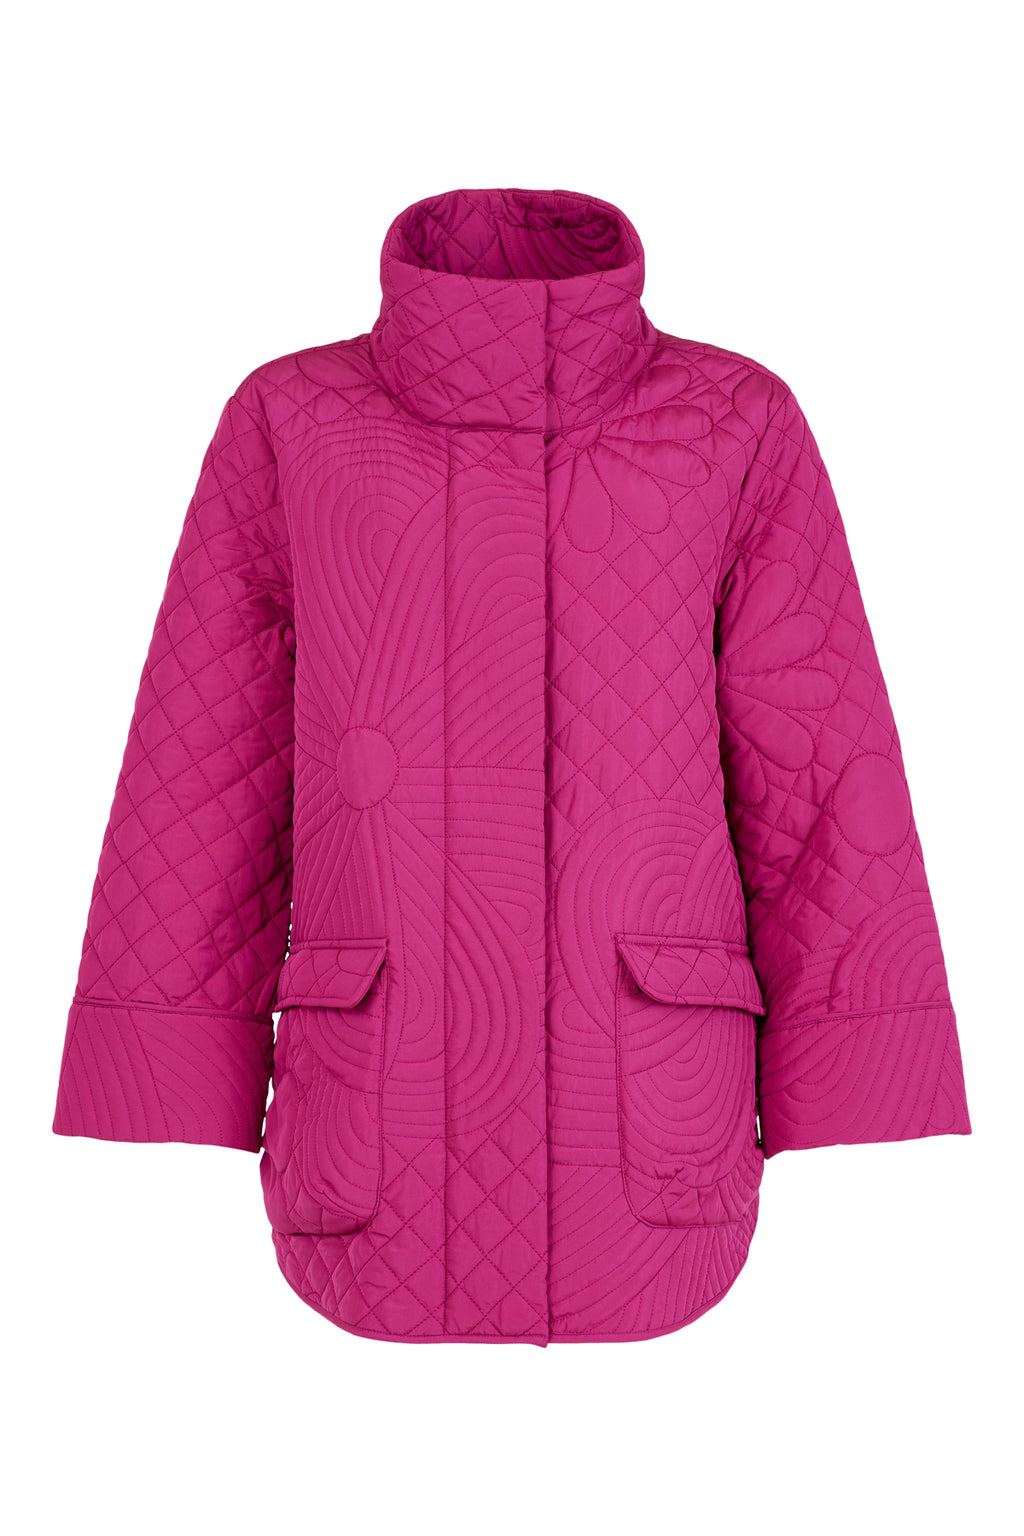 Upgrade your style! Get noticed with our vibrant pink Noen coat